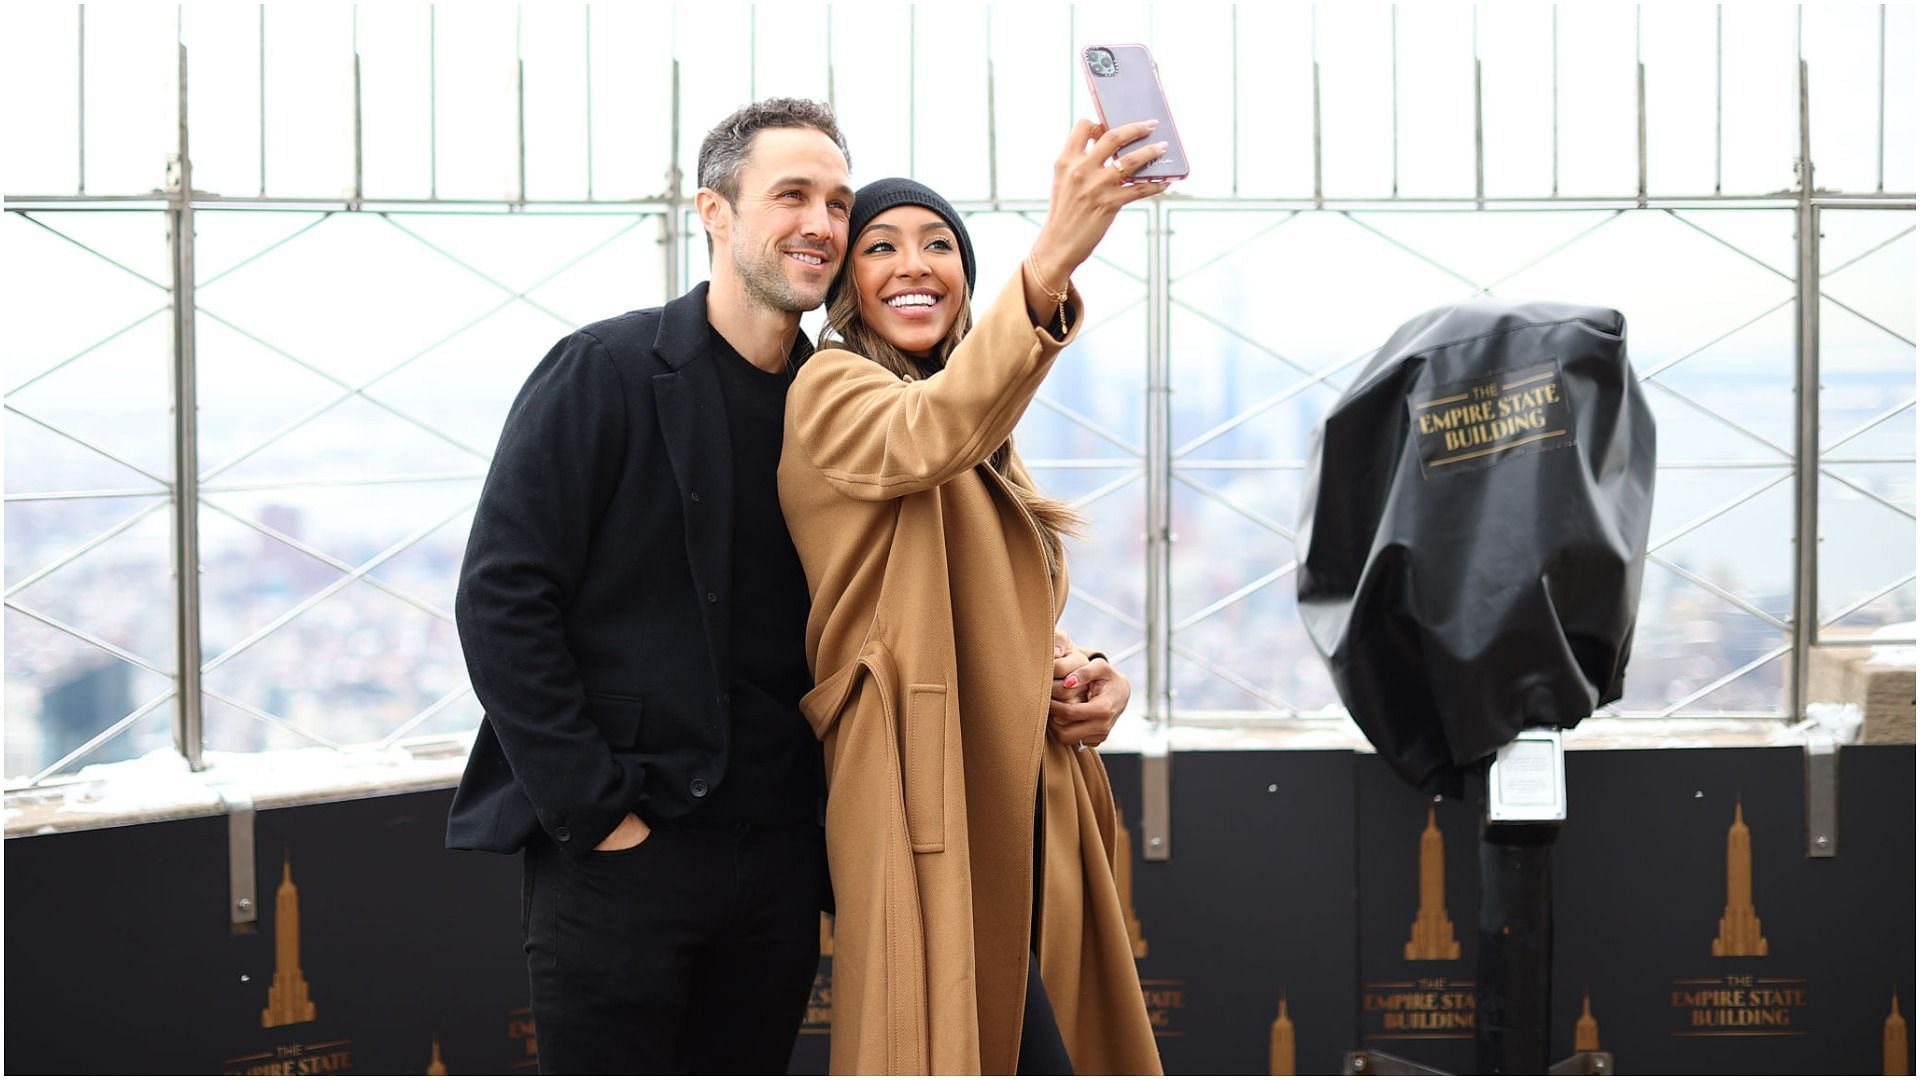 Tayshia Adams and Zac Clark celebrate their love at The Empire State Building (Image via Getty Images/Dimitrios Kambouris)